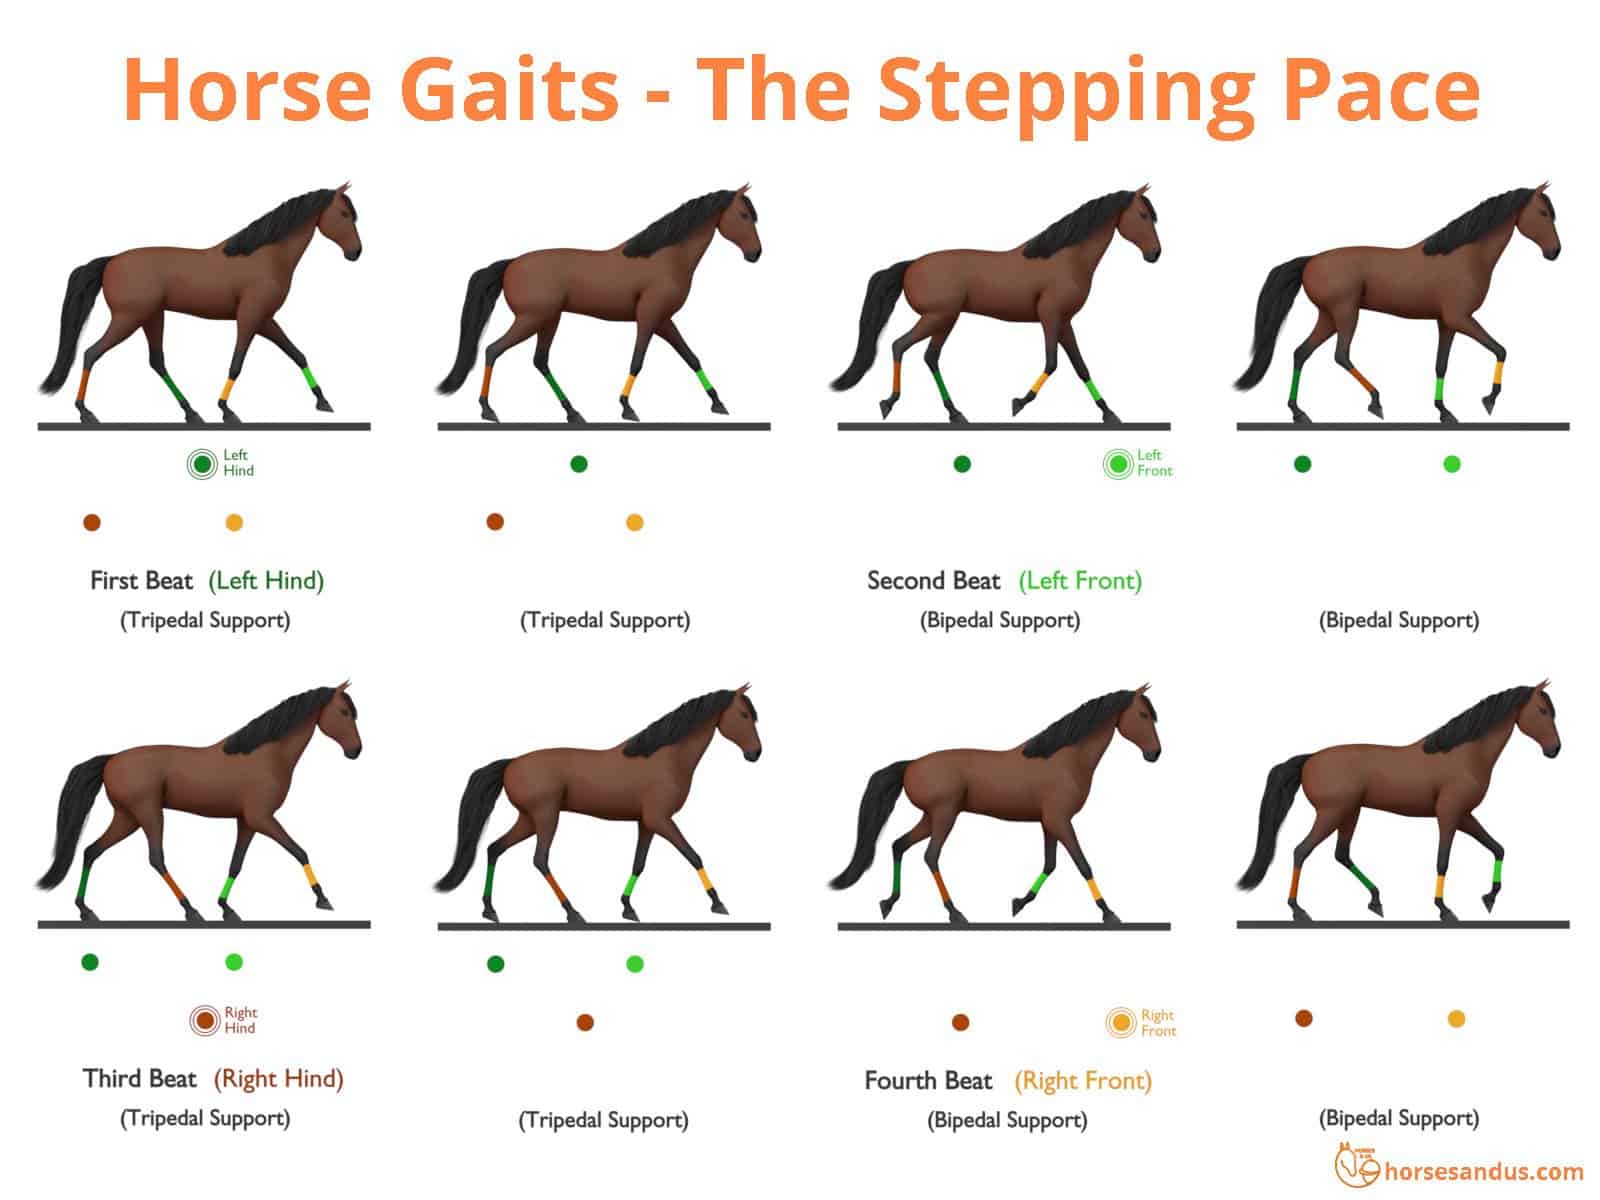 Sequence of footfalls for the Stepping Pace